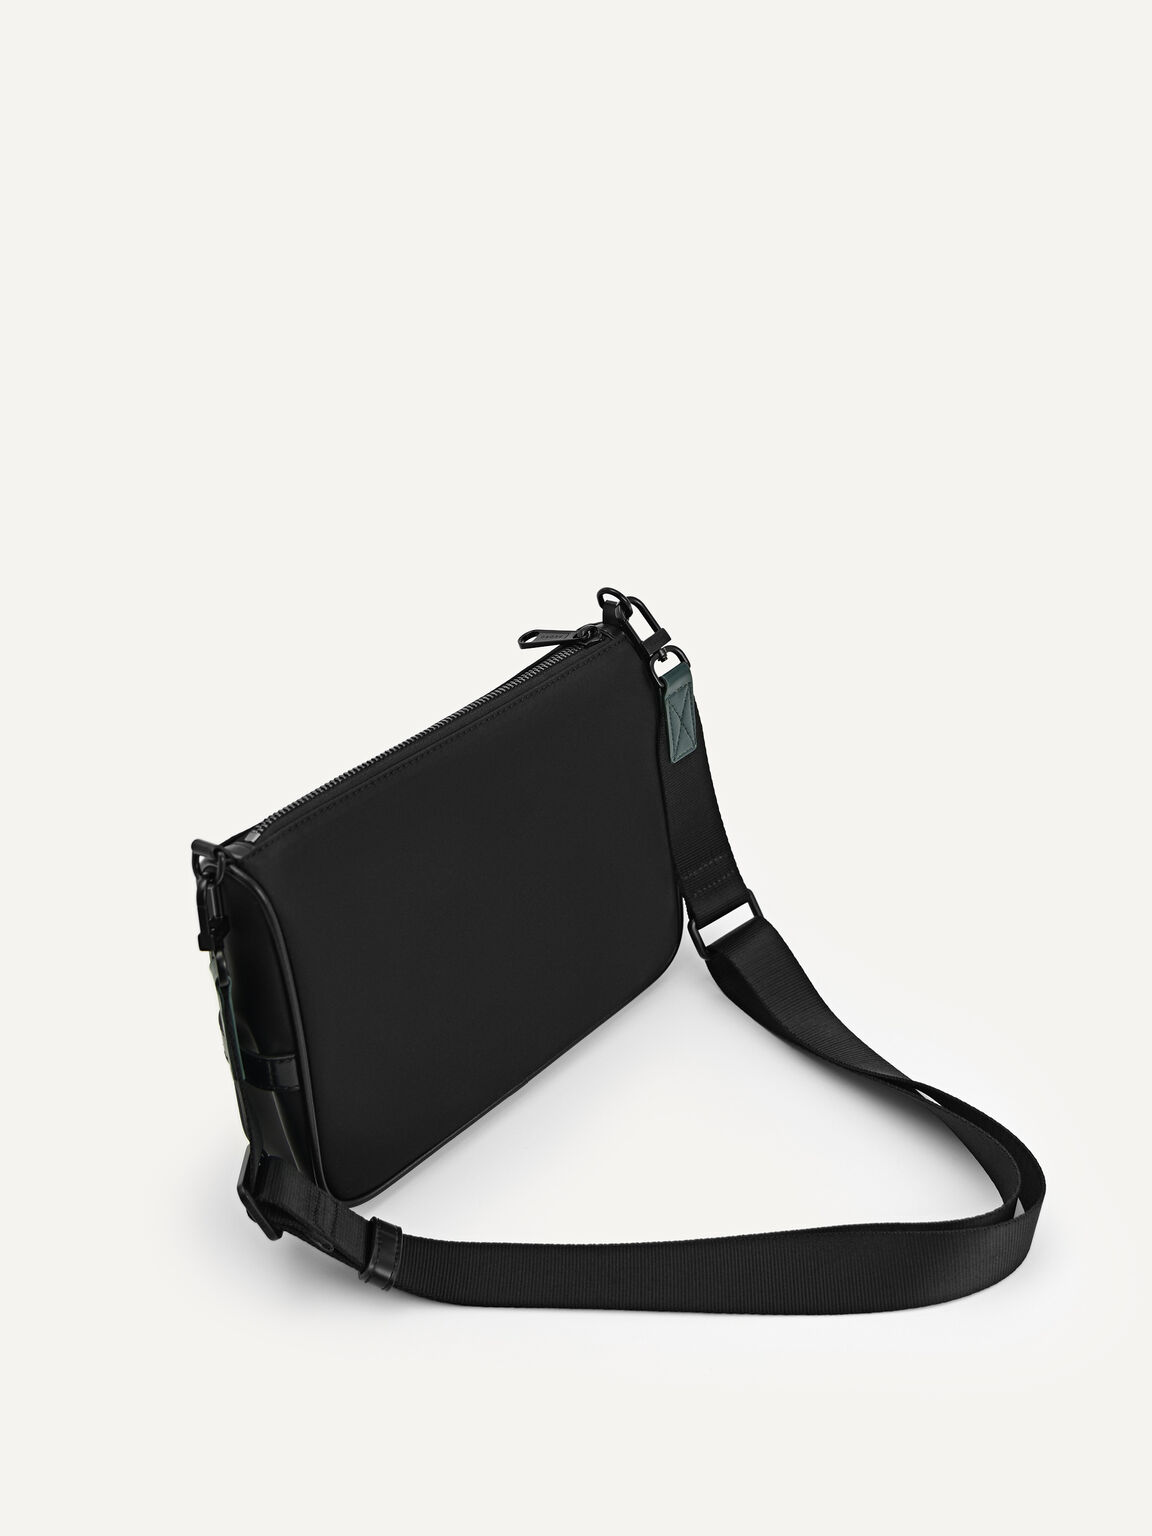 Nylon Sling Bag with Pouch, Black